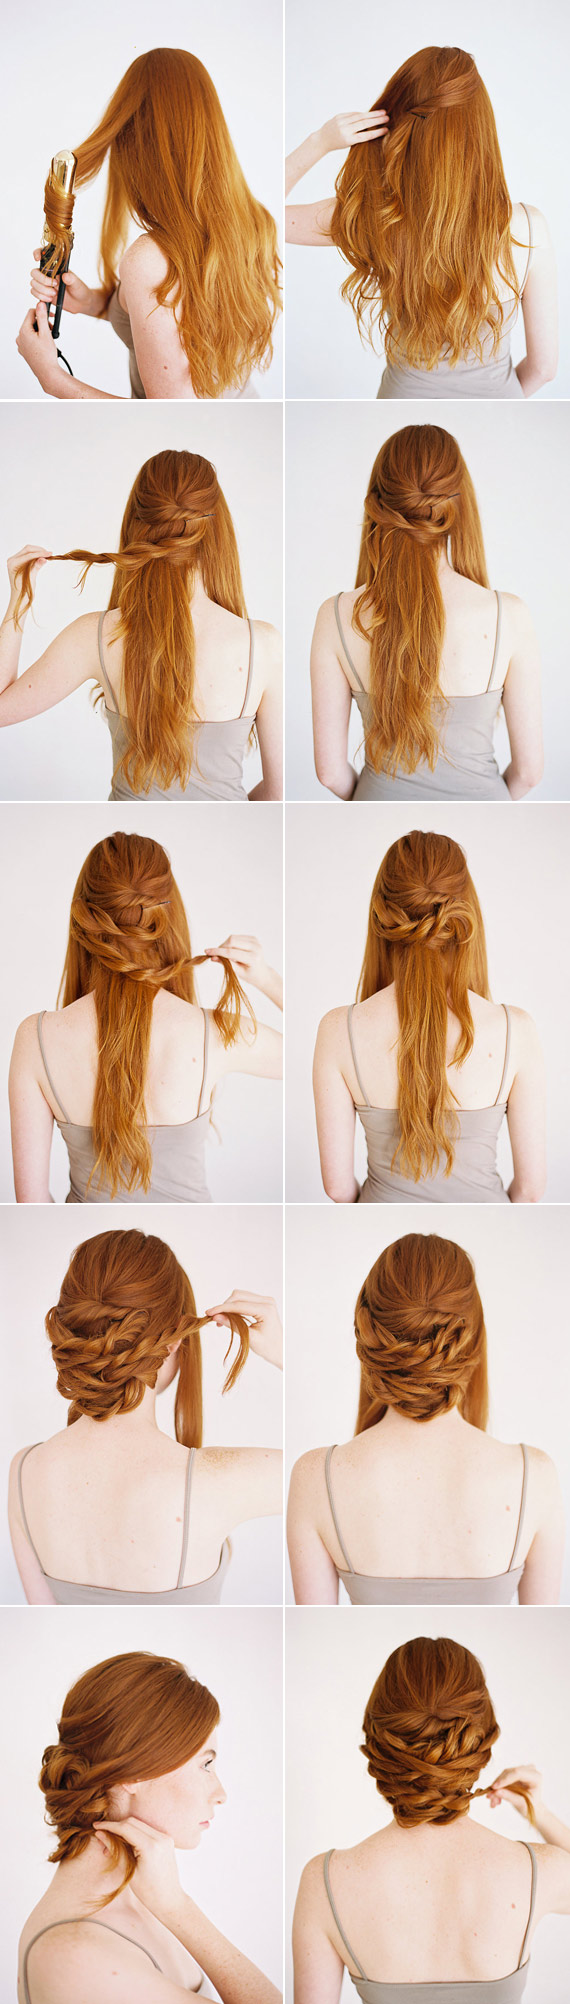 How-to create a low twisted updo